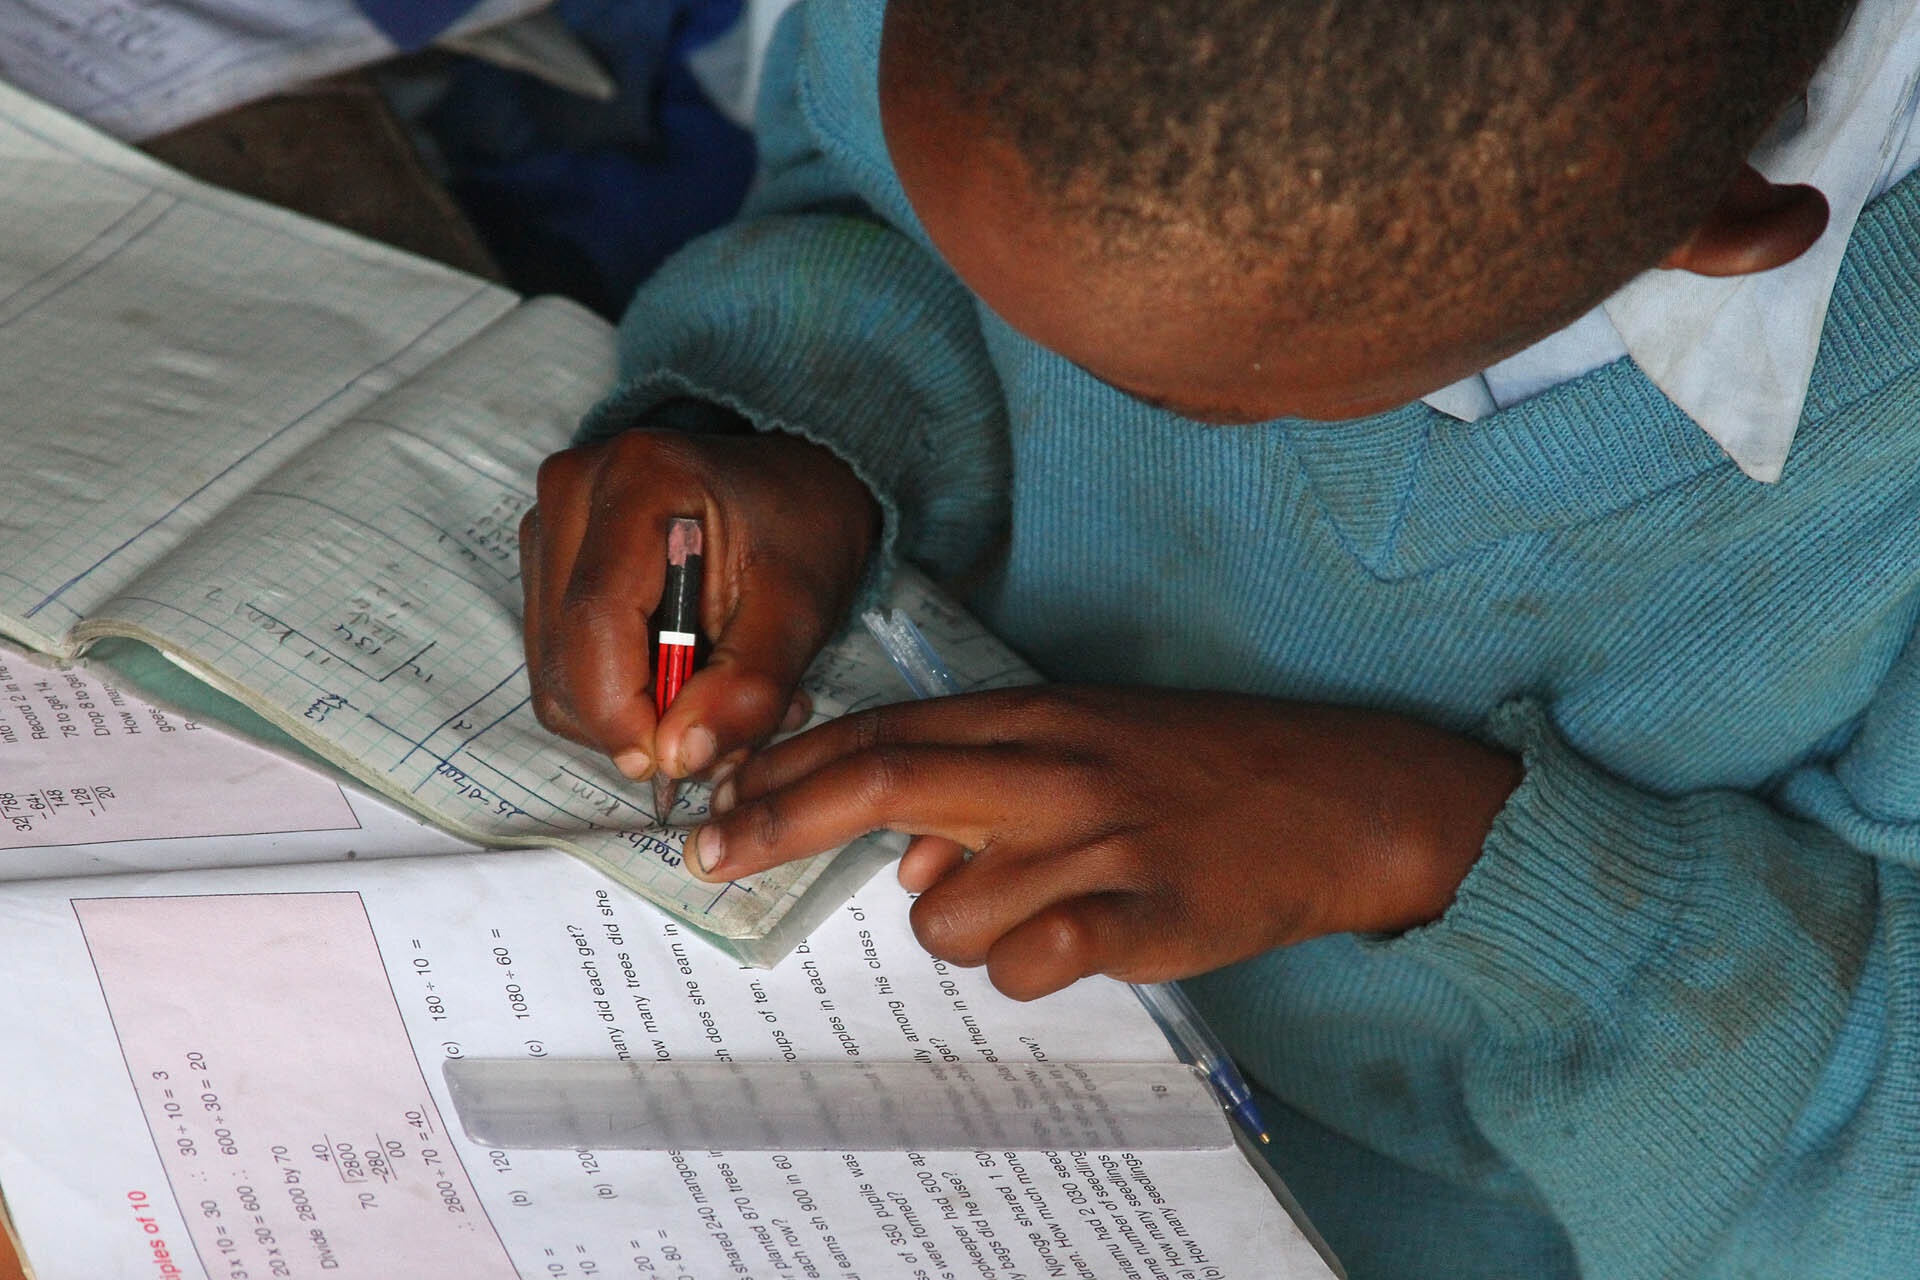 A young boy is working on a math assignment